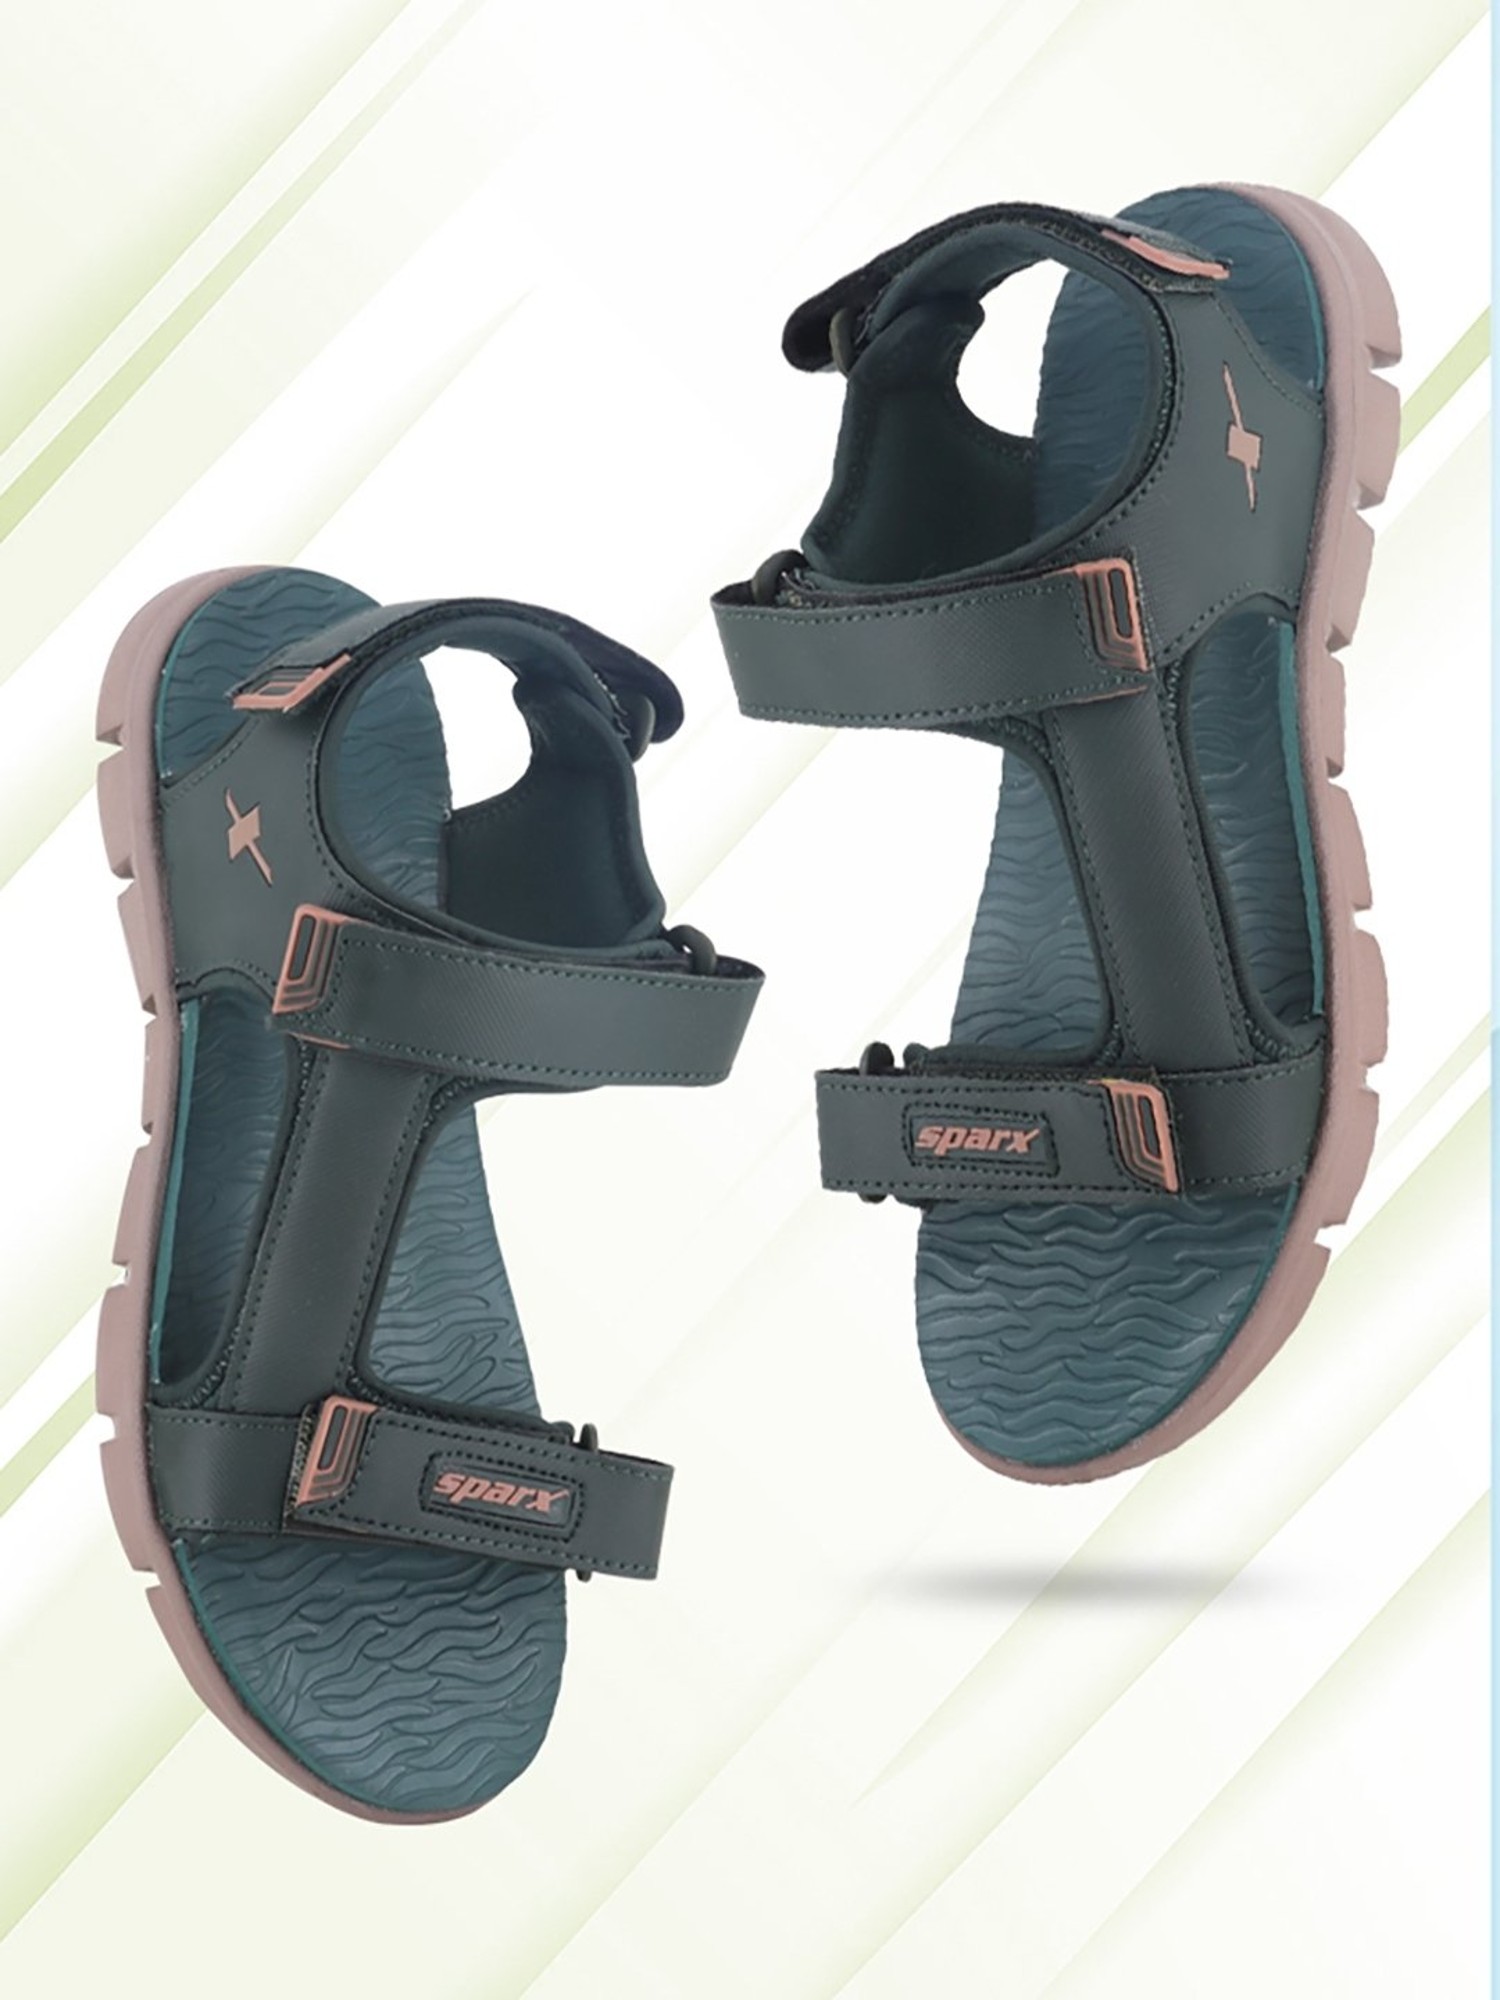 15 Popular Sparx Sandals For Men and Women In New Models